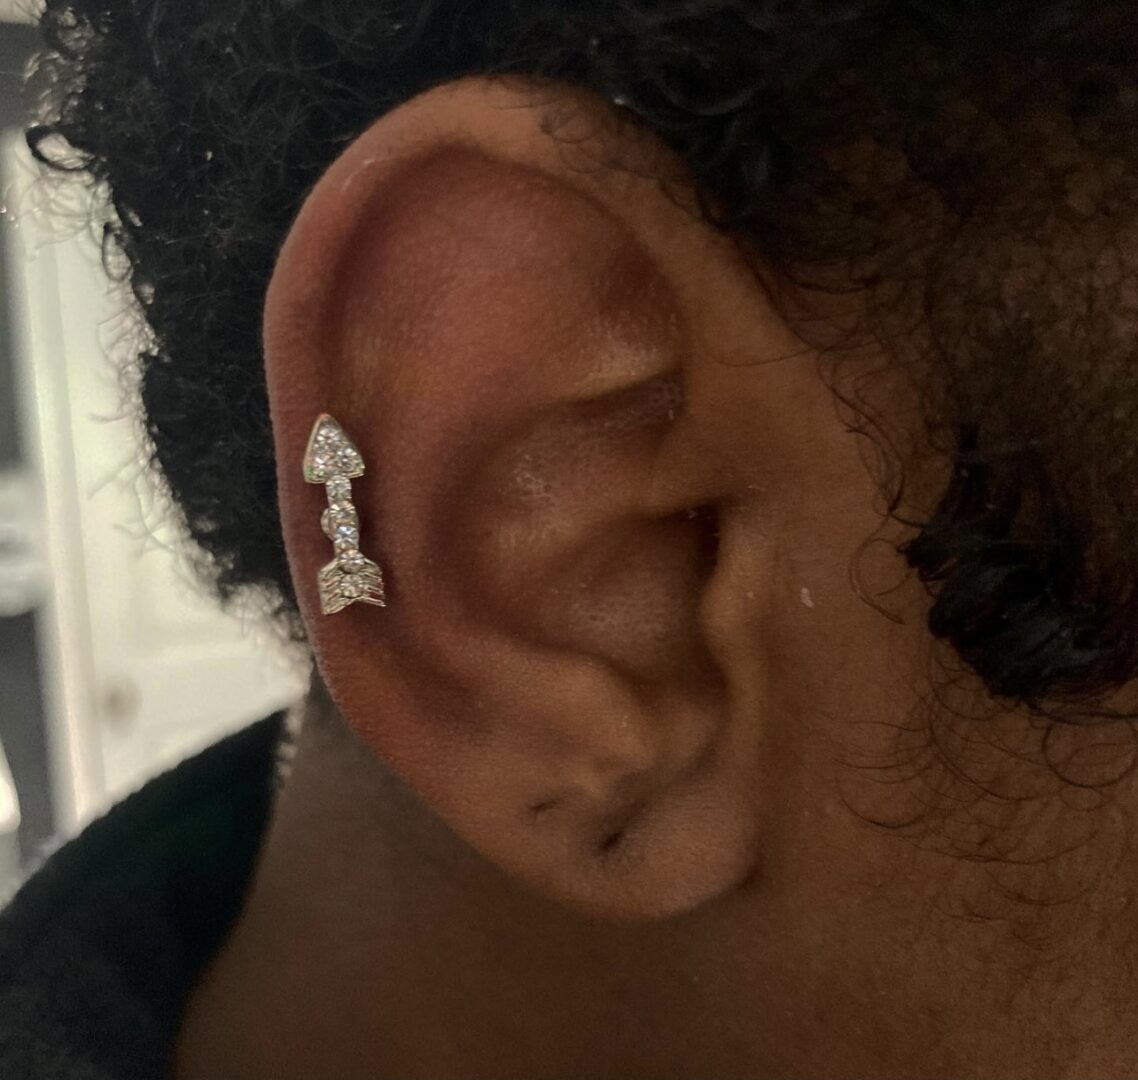 A woman with a piercing in her ear.